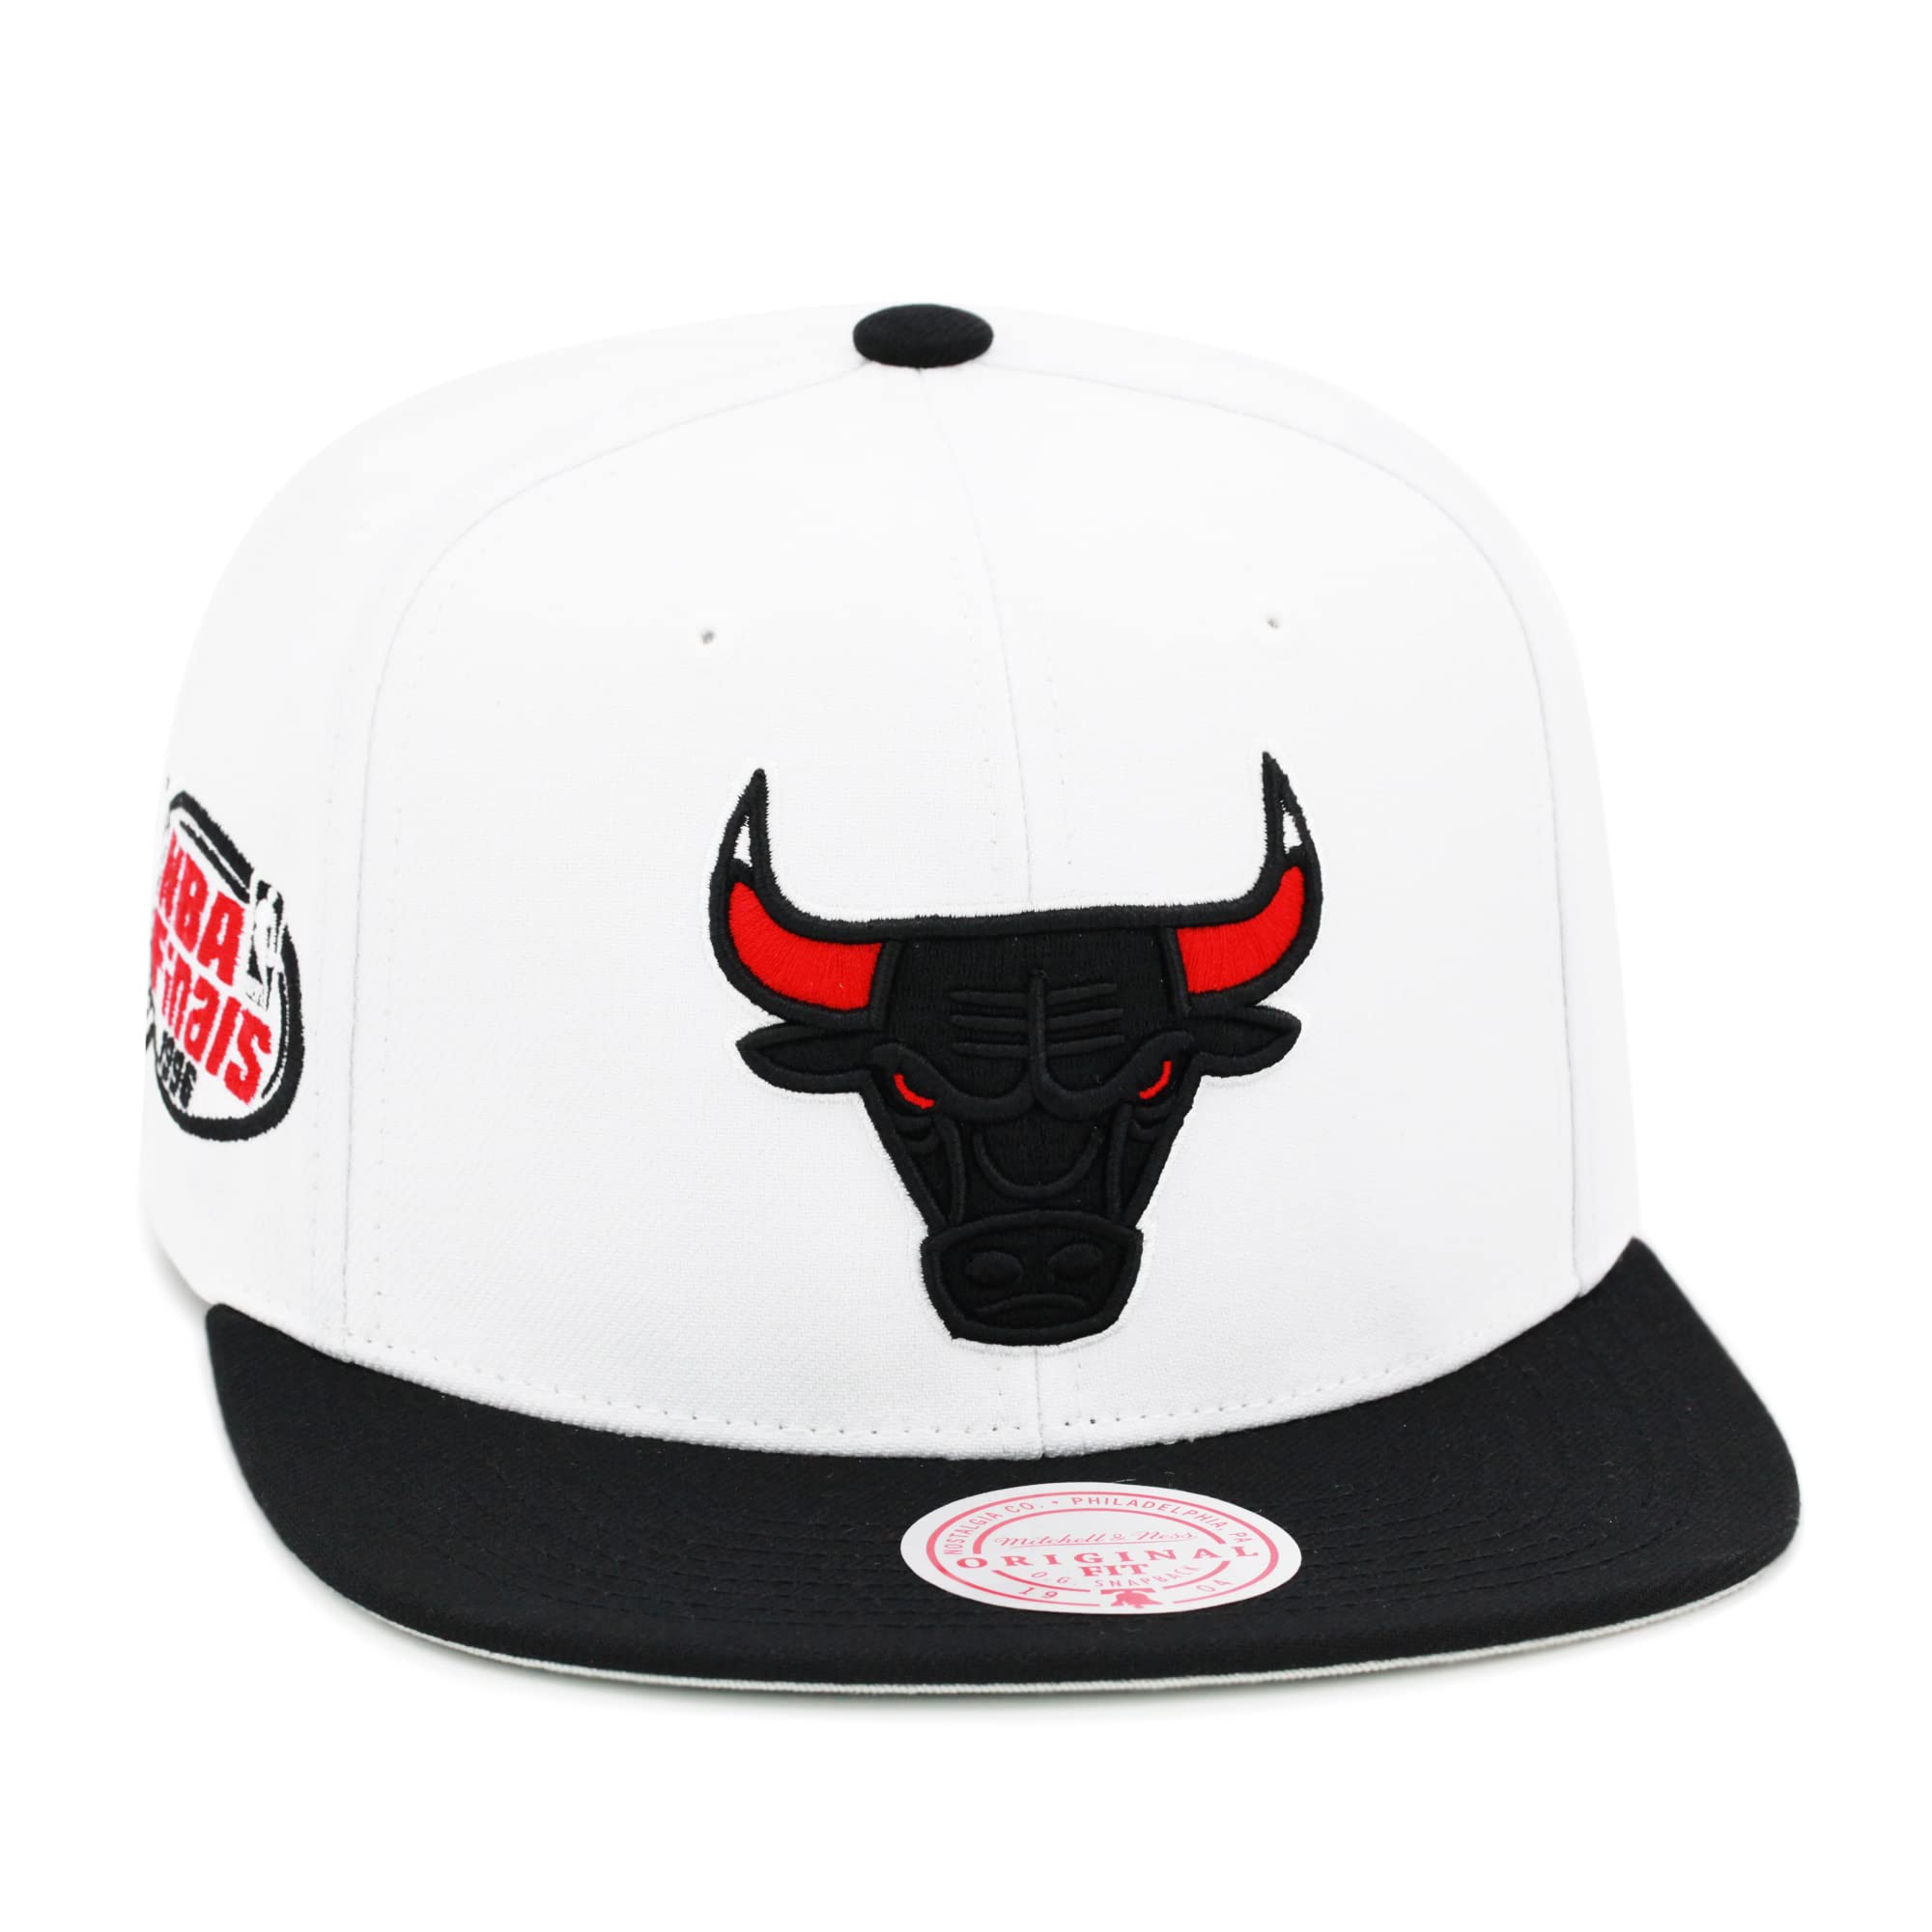 Mitchell & Ness Chicago Bulls NBA Playoff Wins Snapback Hat Adjustable Cap - White/Black/Red/NBA Finals 1996 Side Patch - Caps Fitted Caps Fitted Mitchell & Ness